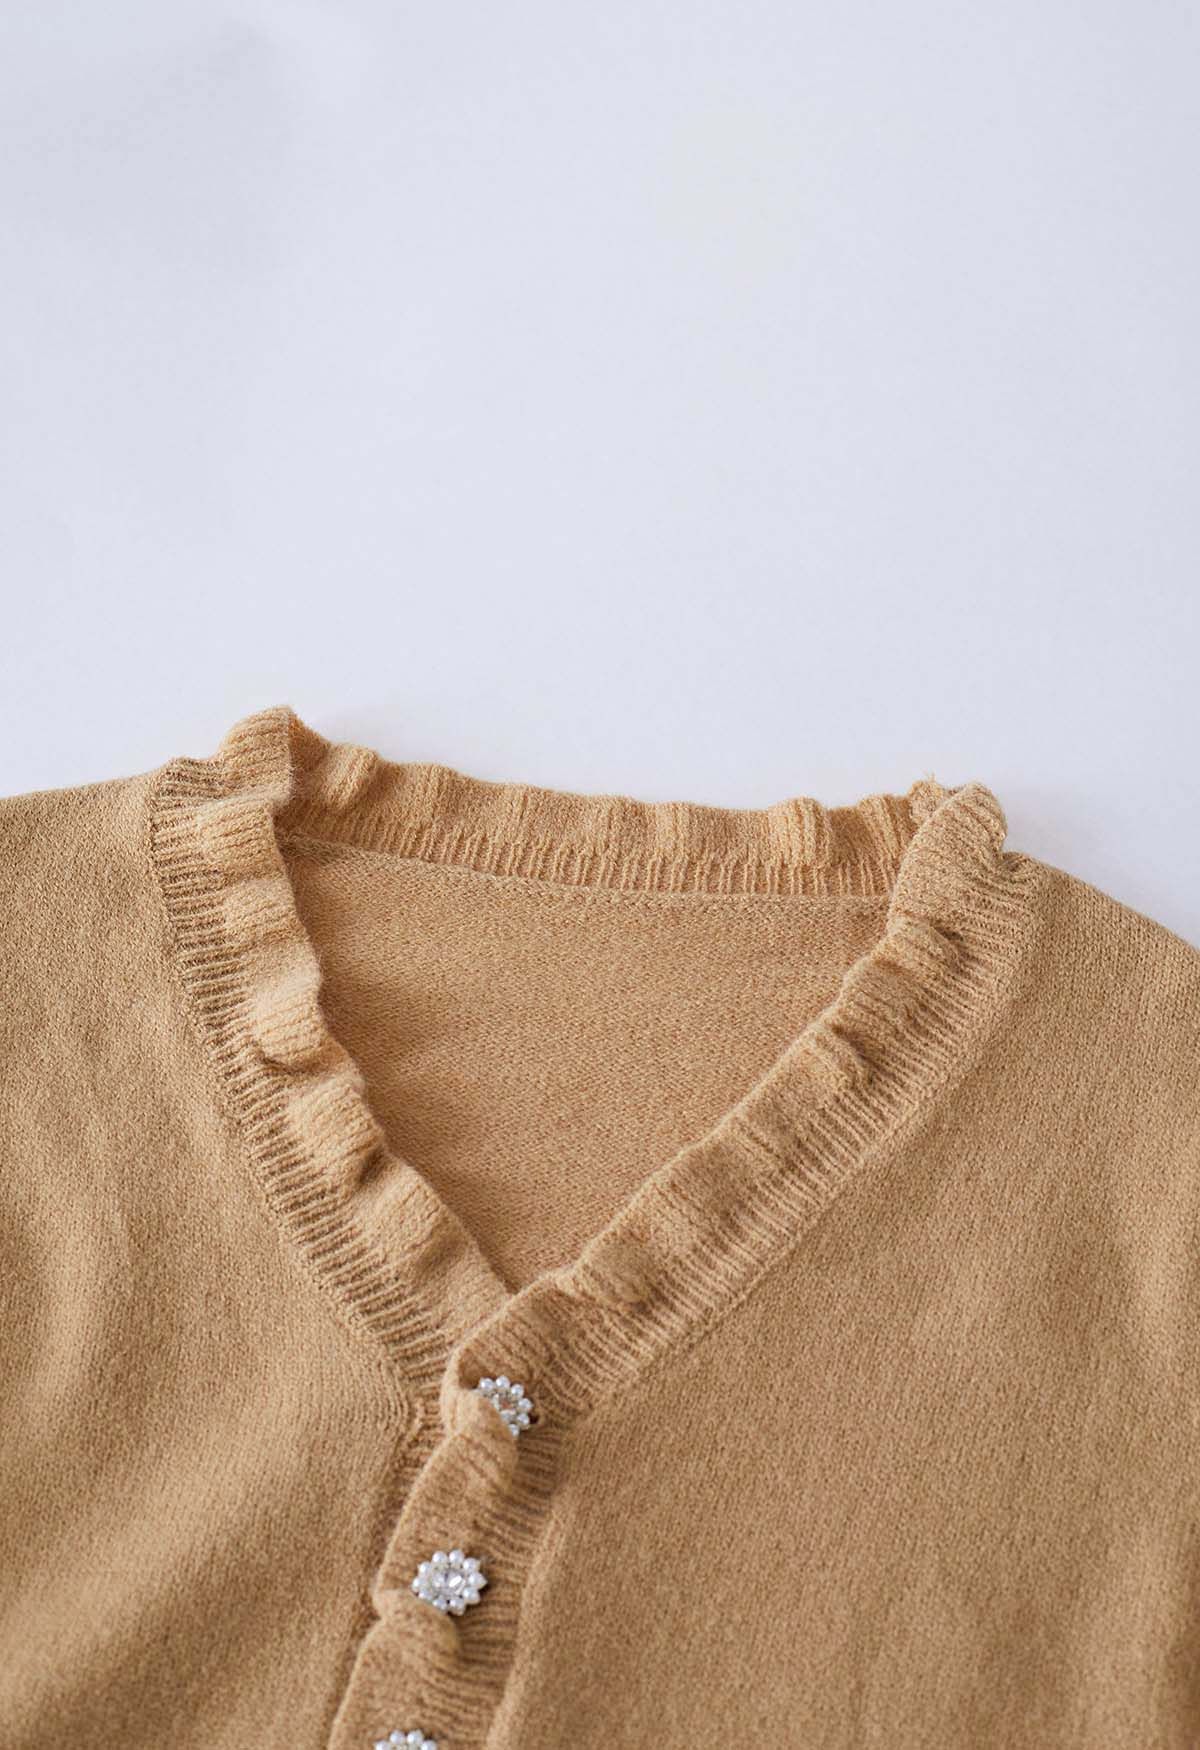 Ruffle Edge Button Front Knit Sweater in Tan